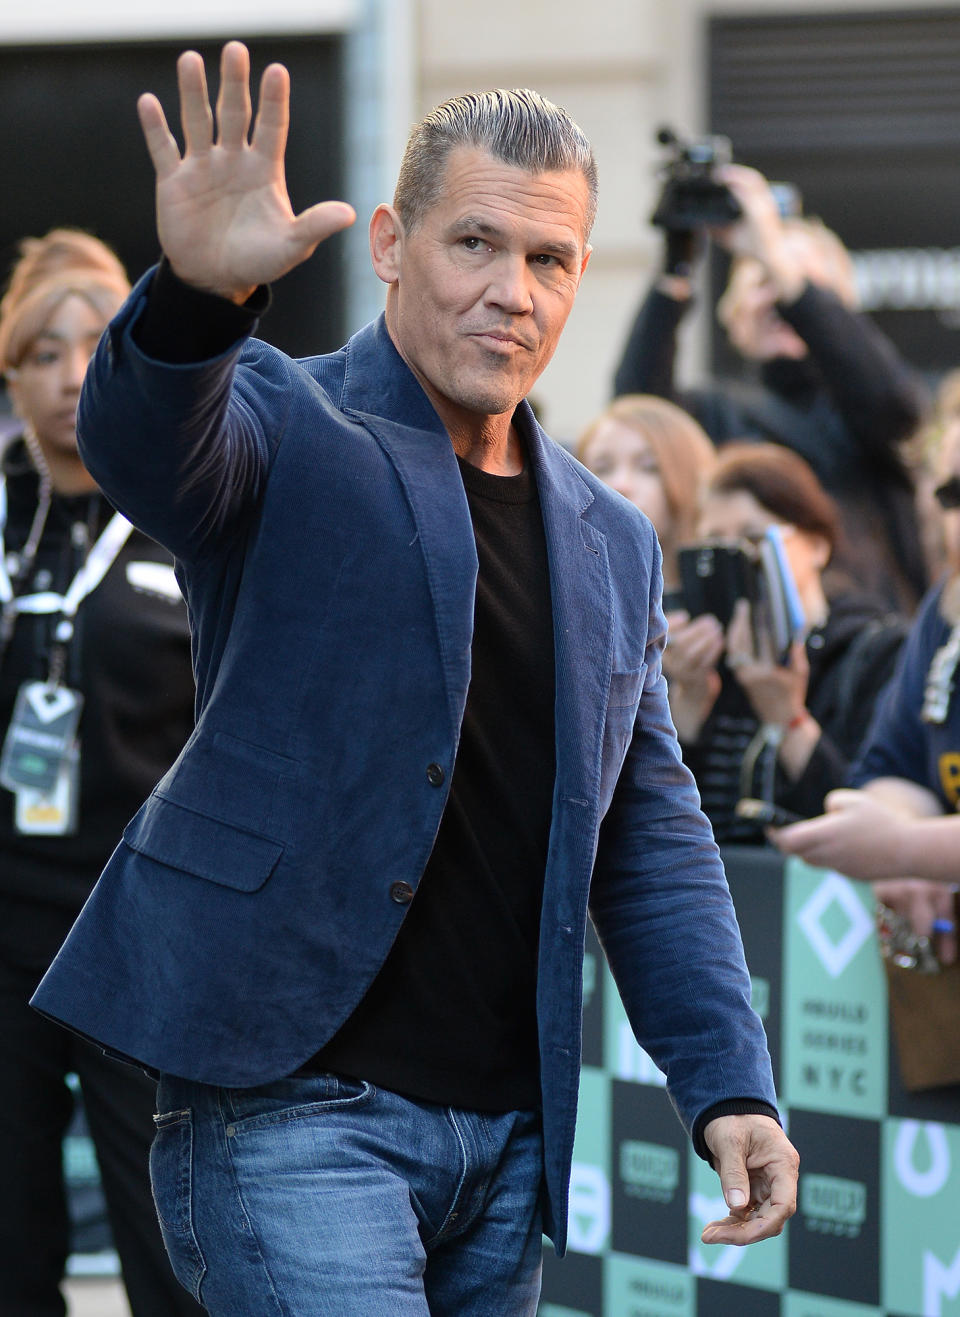 Josh Brolin Celebrates 5 Years of Sobriety by Getting Brutally Honest About a 'Drunk' Night Out